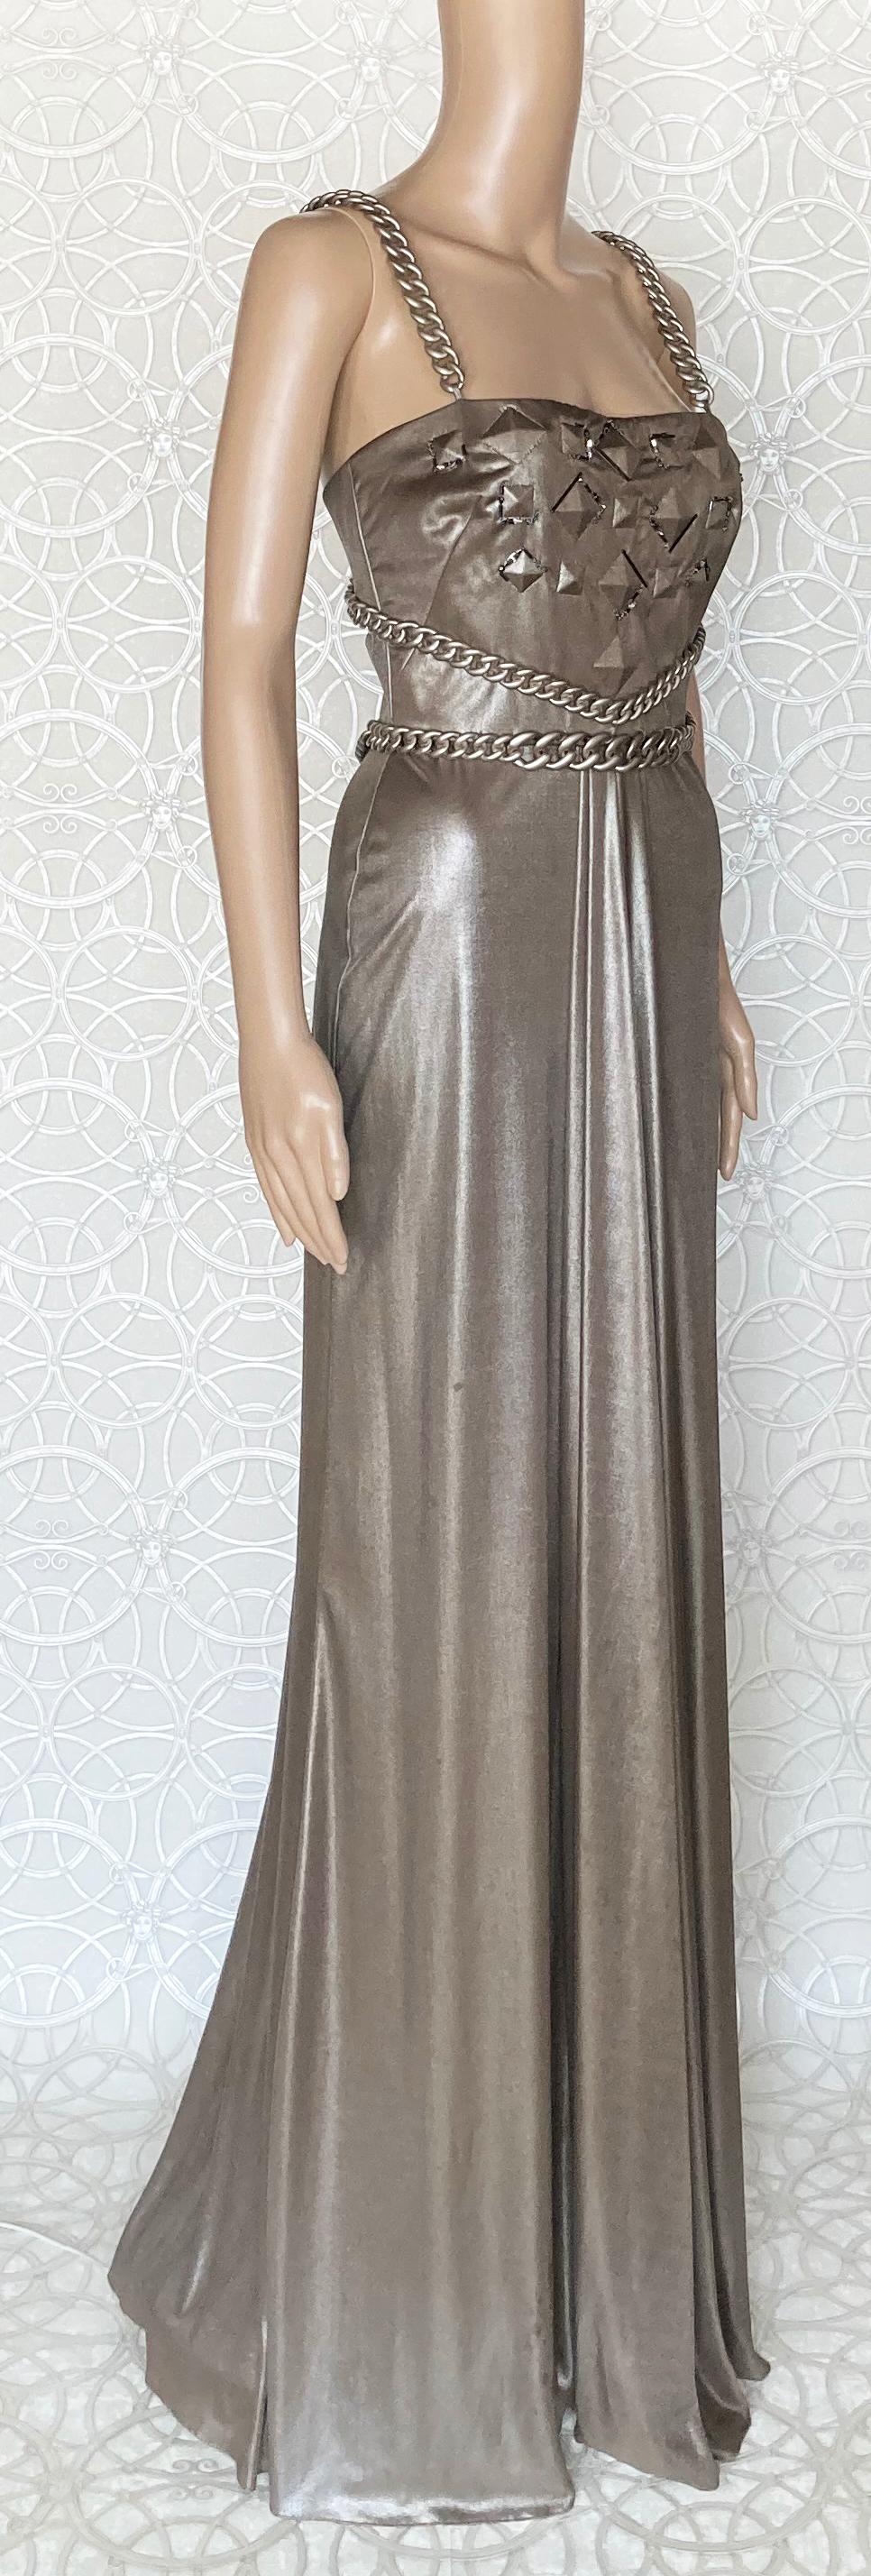 F/W 2005 Look # 45 NEW VERSACE CHAIN EMBELLISHED LONG LAME DRESS 40 - 4 For Sale 6